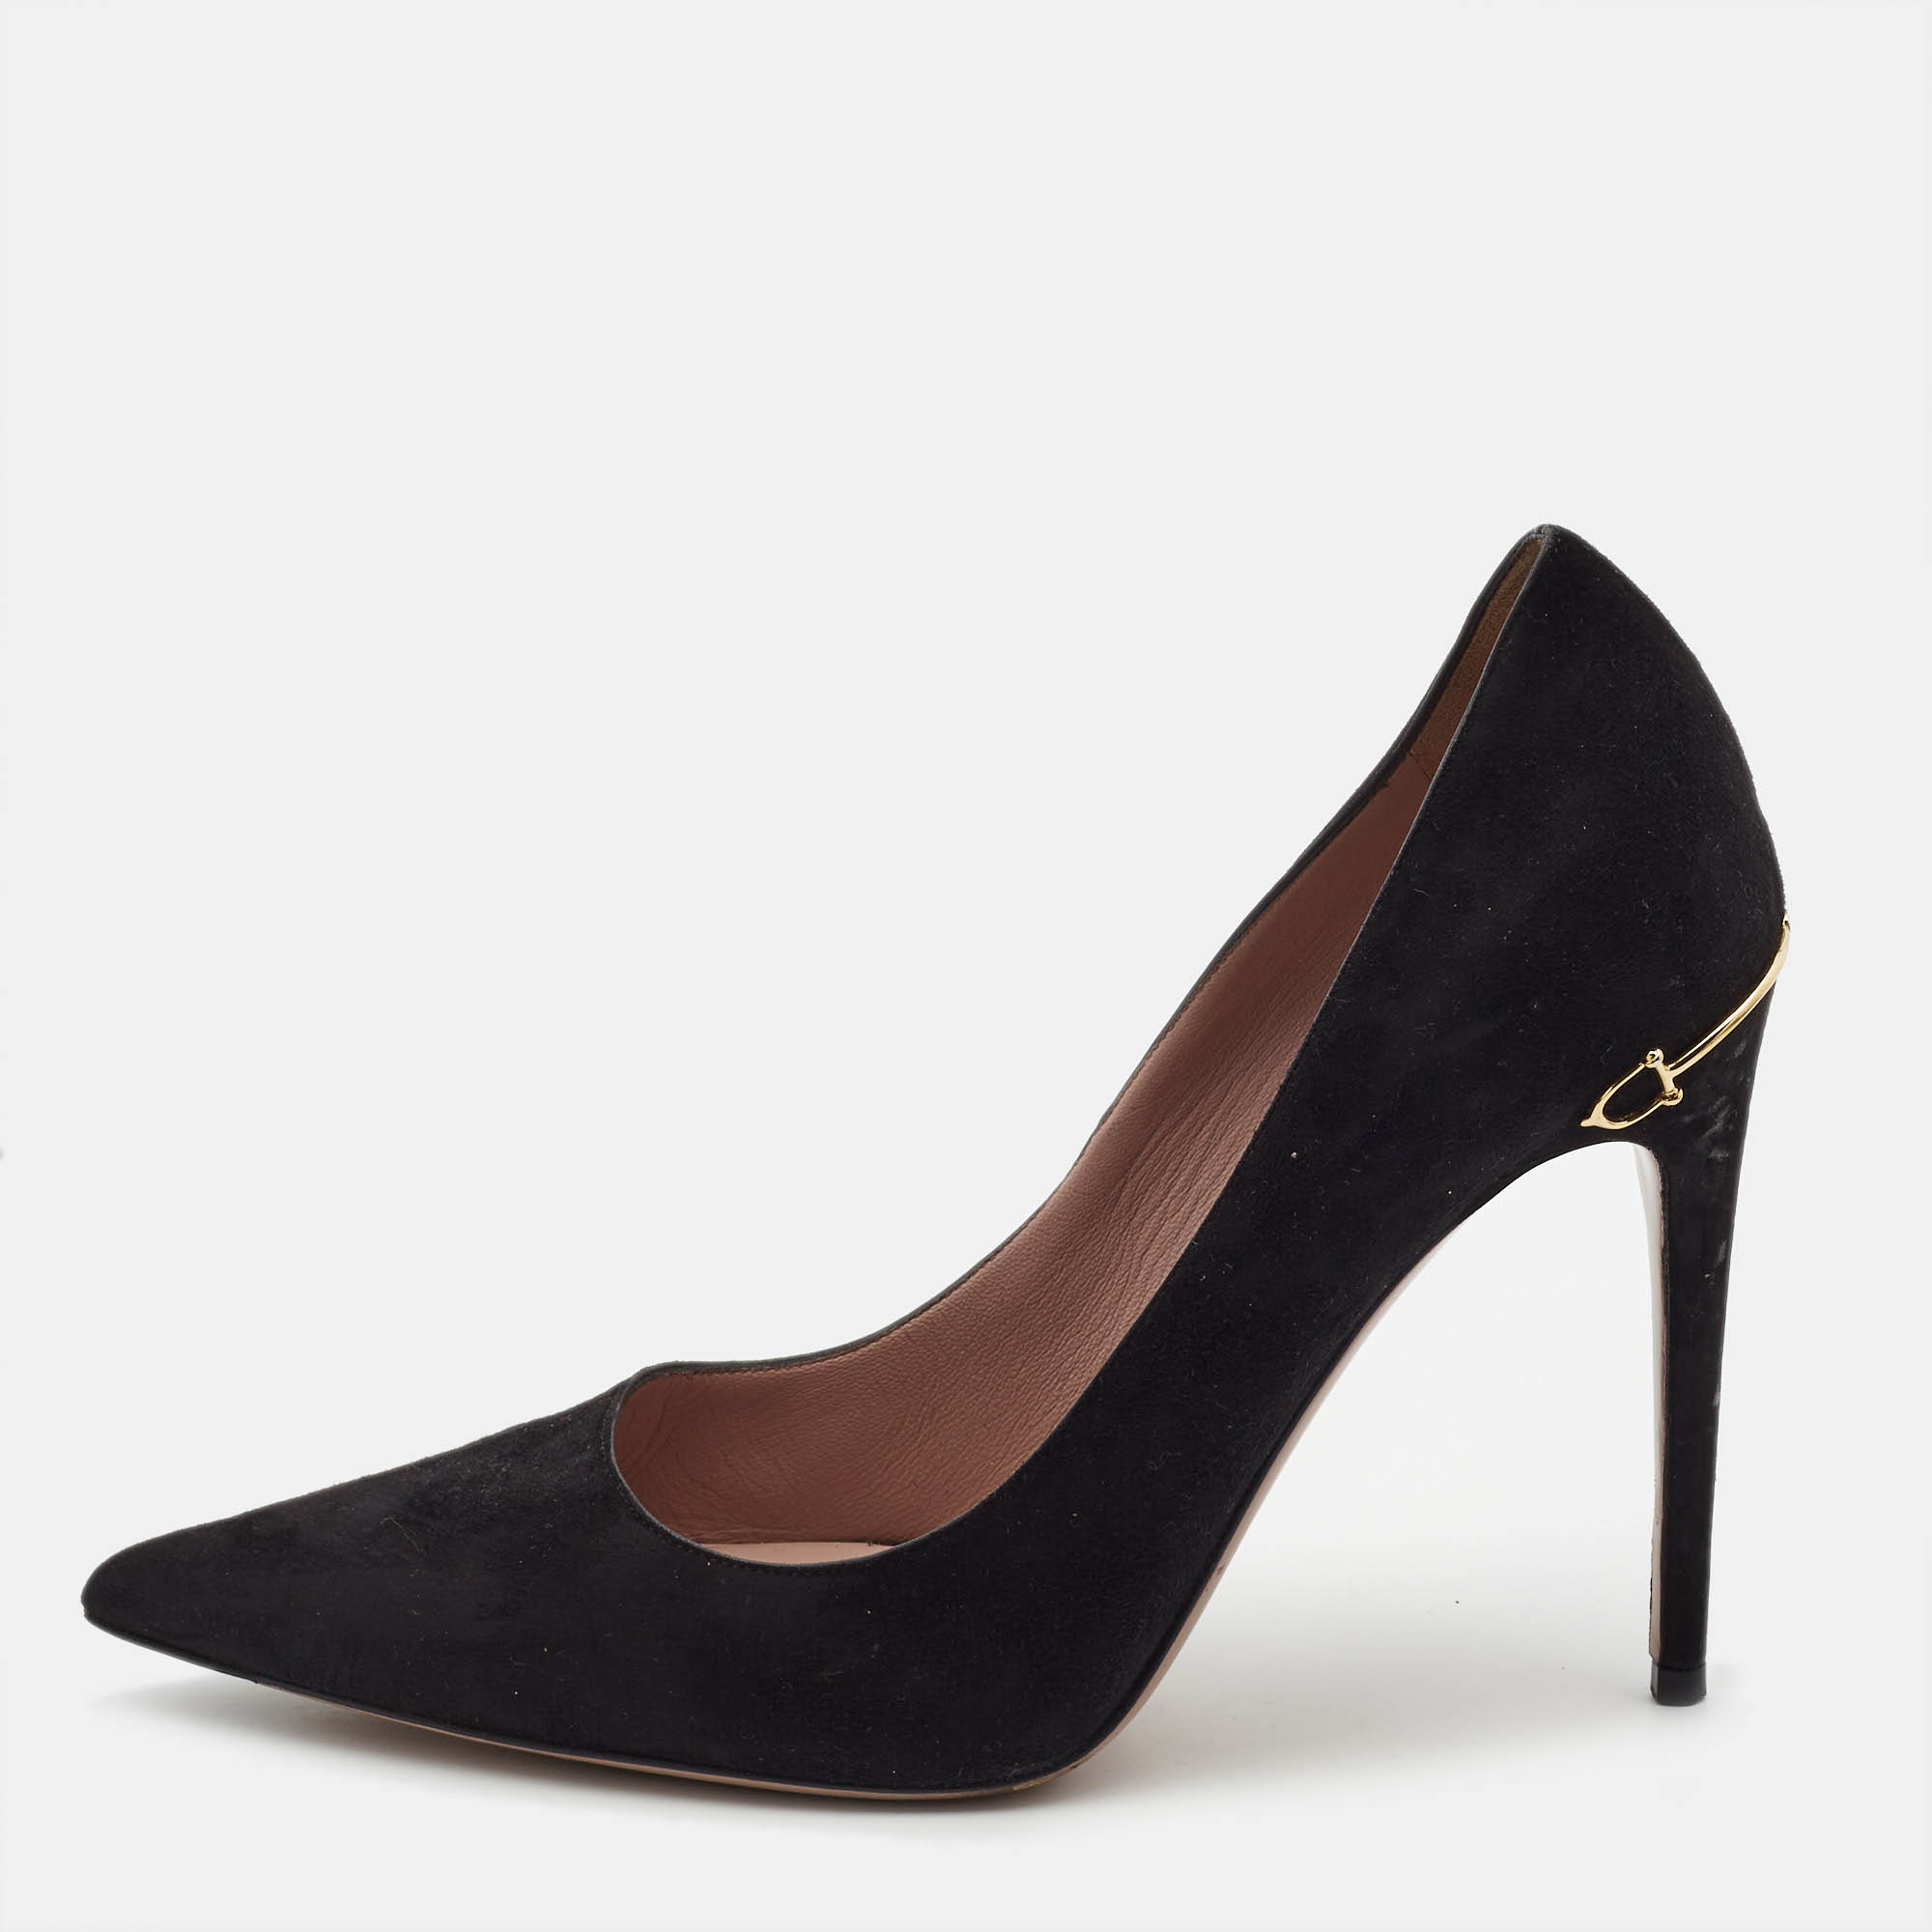 Gucci black suede pointed toe pumps size 37.5